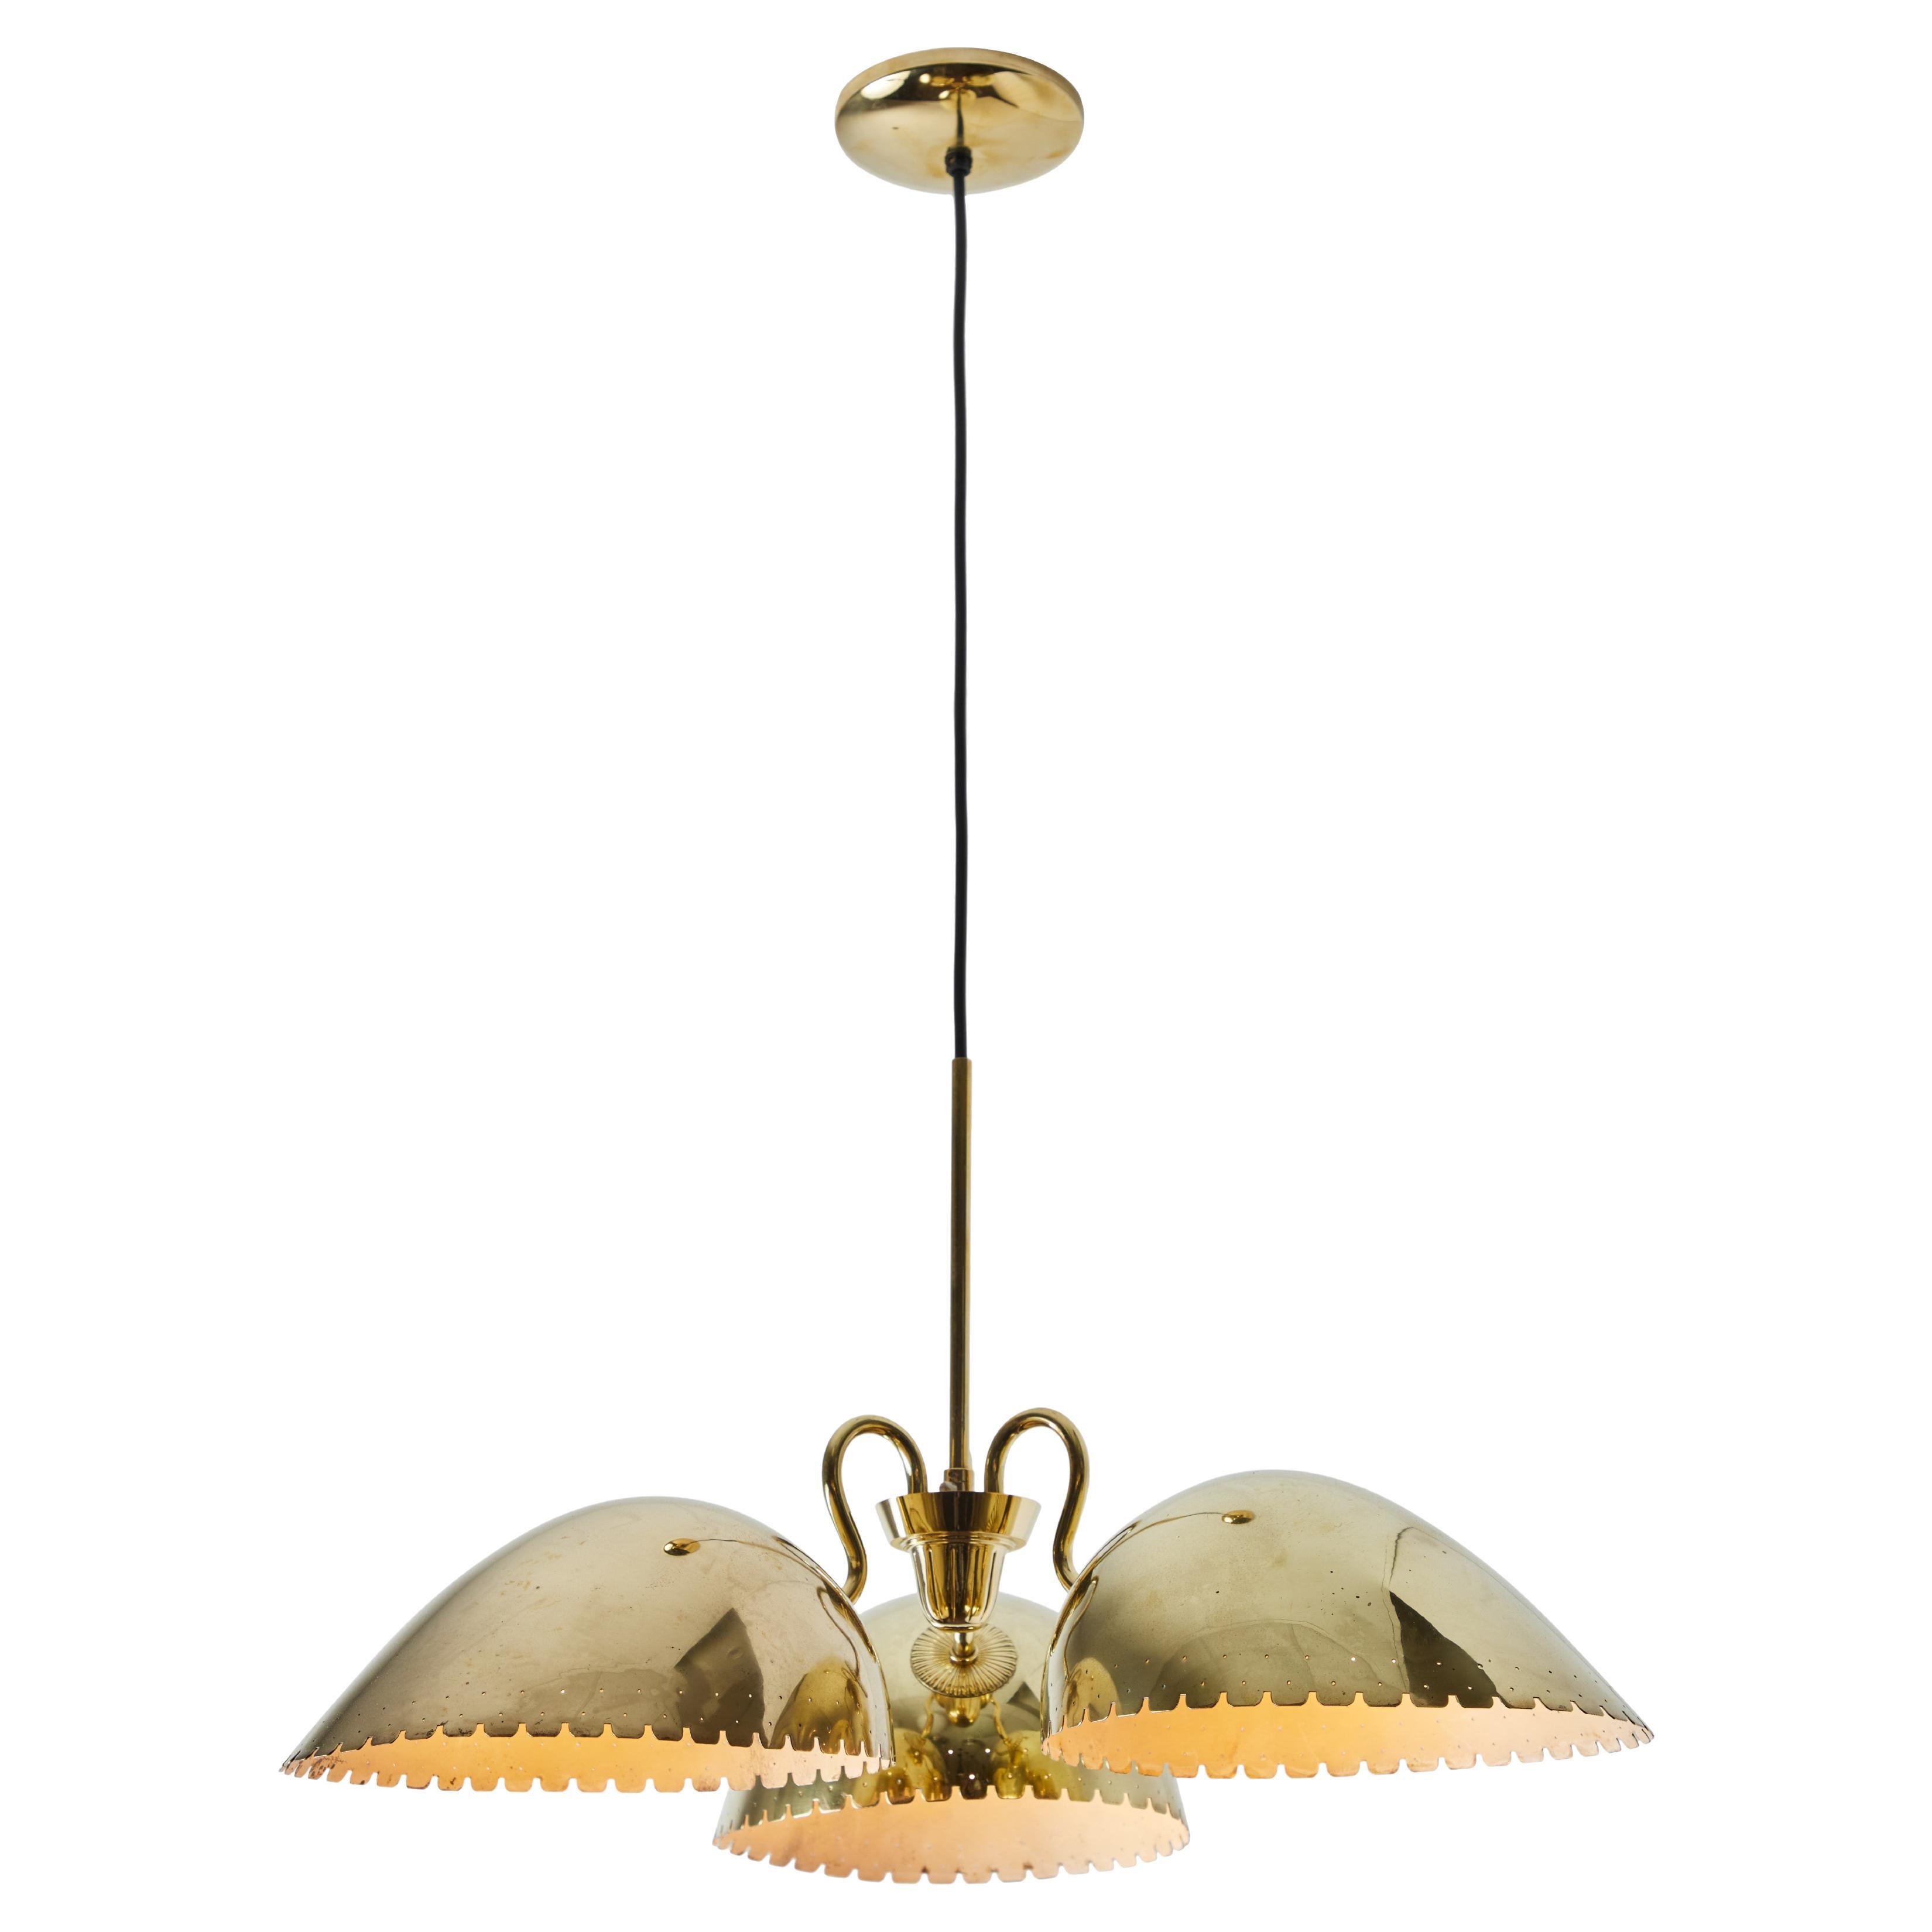 1940s Carl-Axel Acking Perforated Brass Chandelier for Böhlmarks